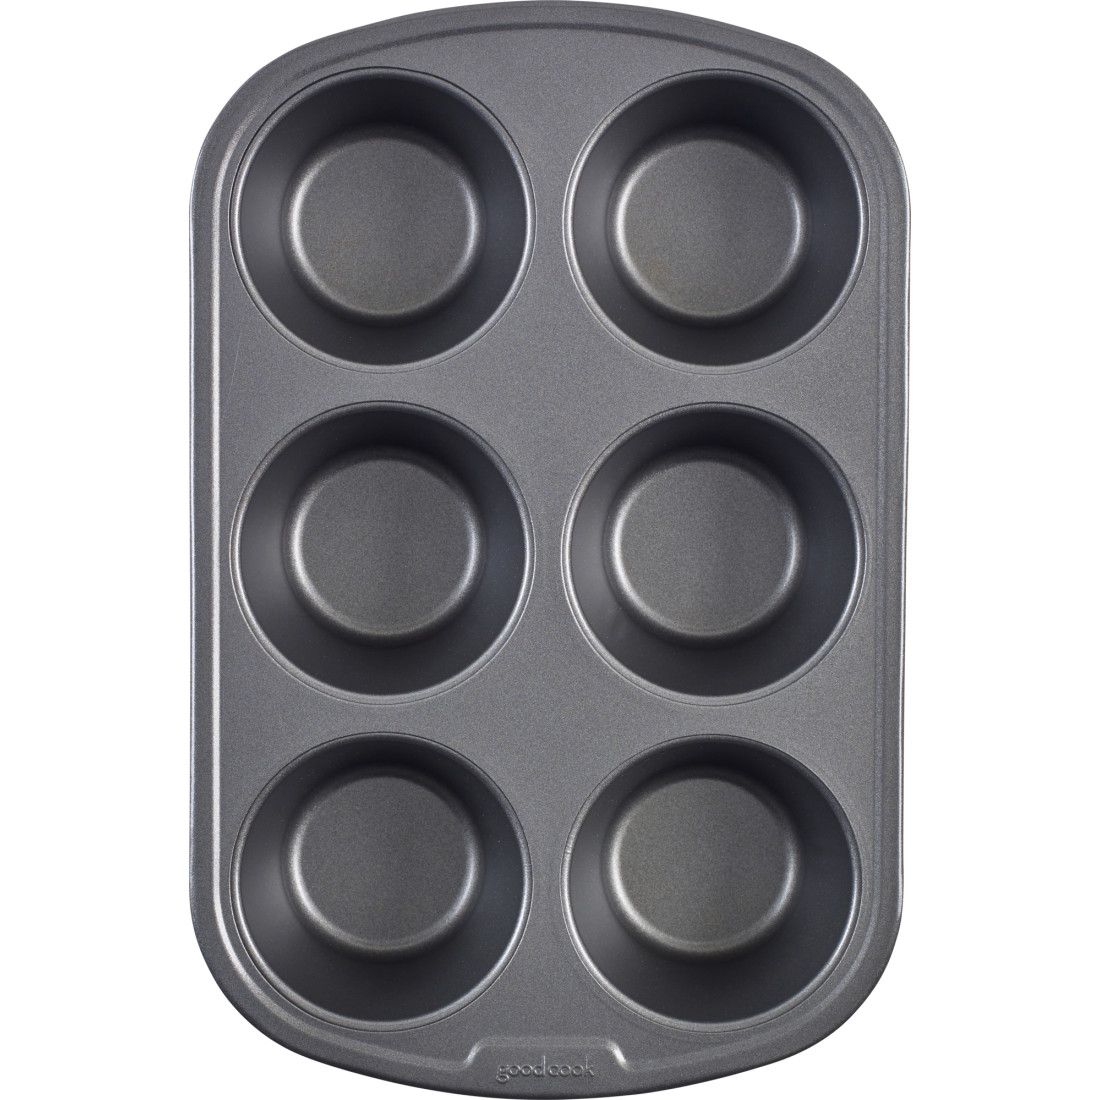 Sturdy Metal Handle Non-Stick 6 Cup Large Premium Silicone Muffin Pan & Cupcake Maker - Top Standard Size (Half of Texas Jumbo) Patented Reinforced